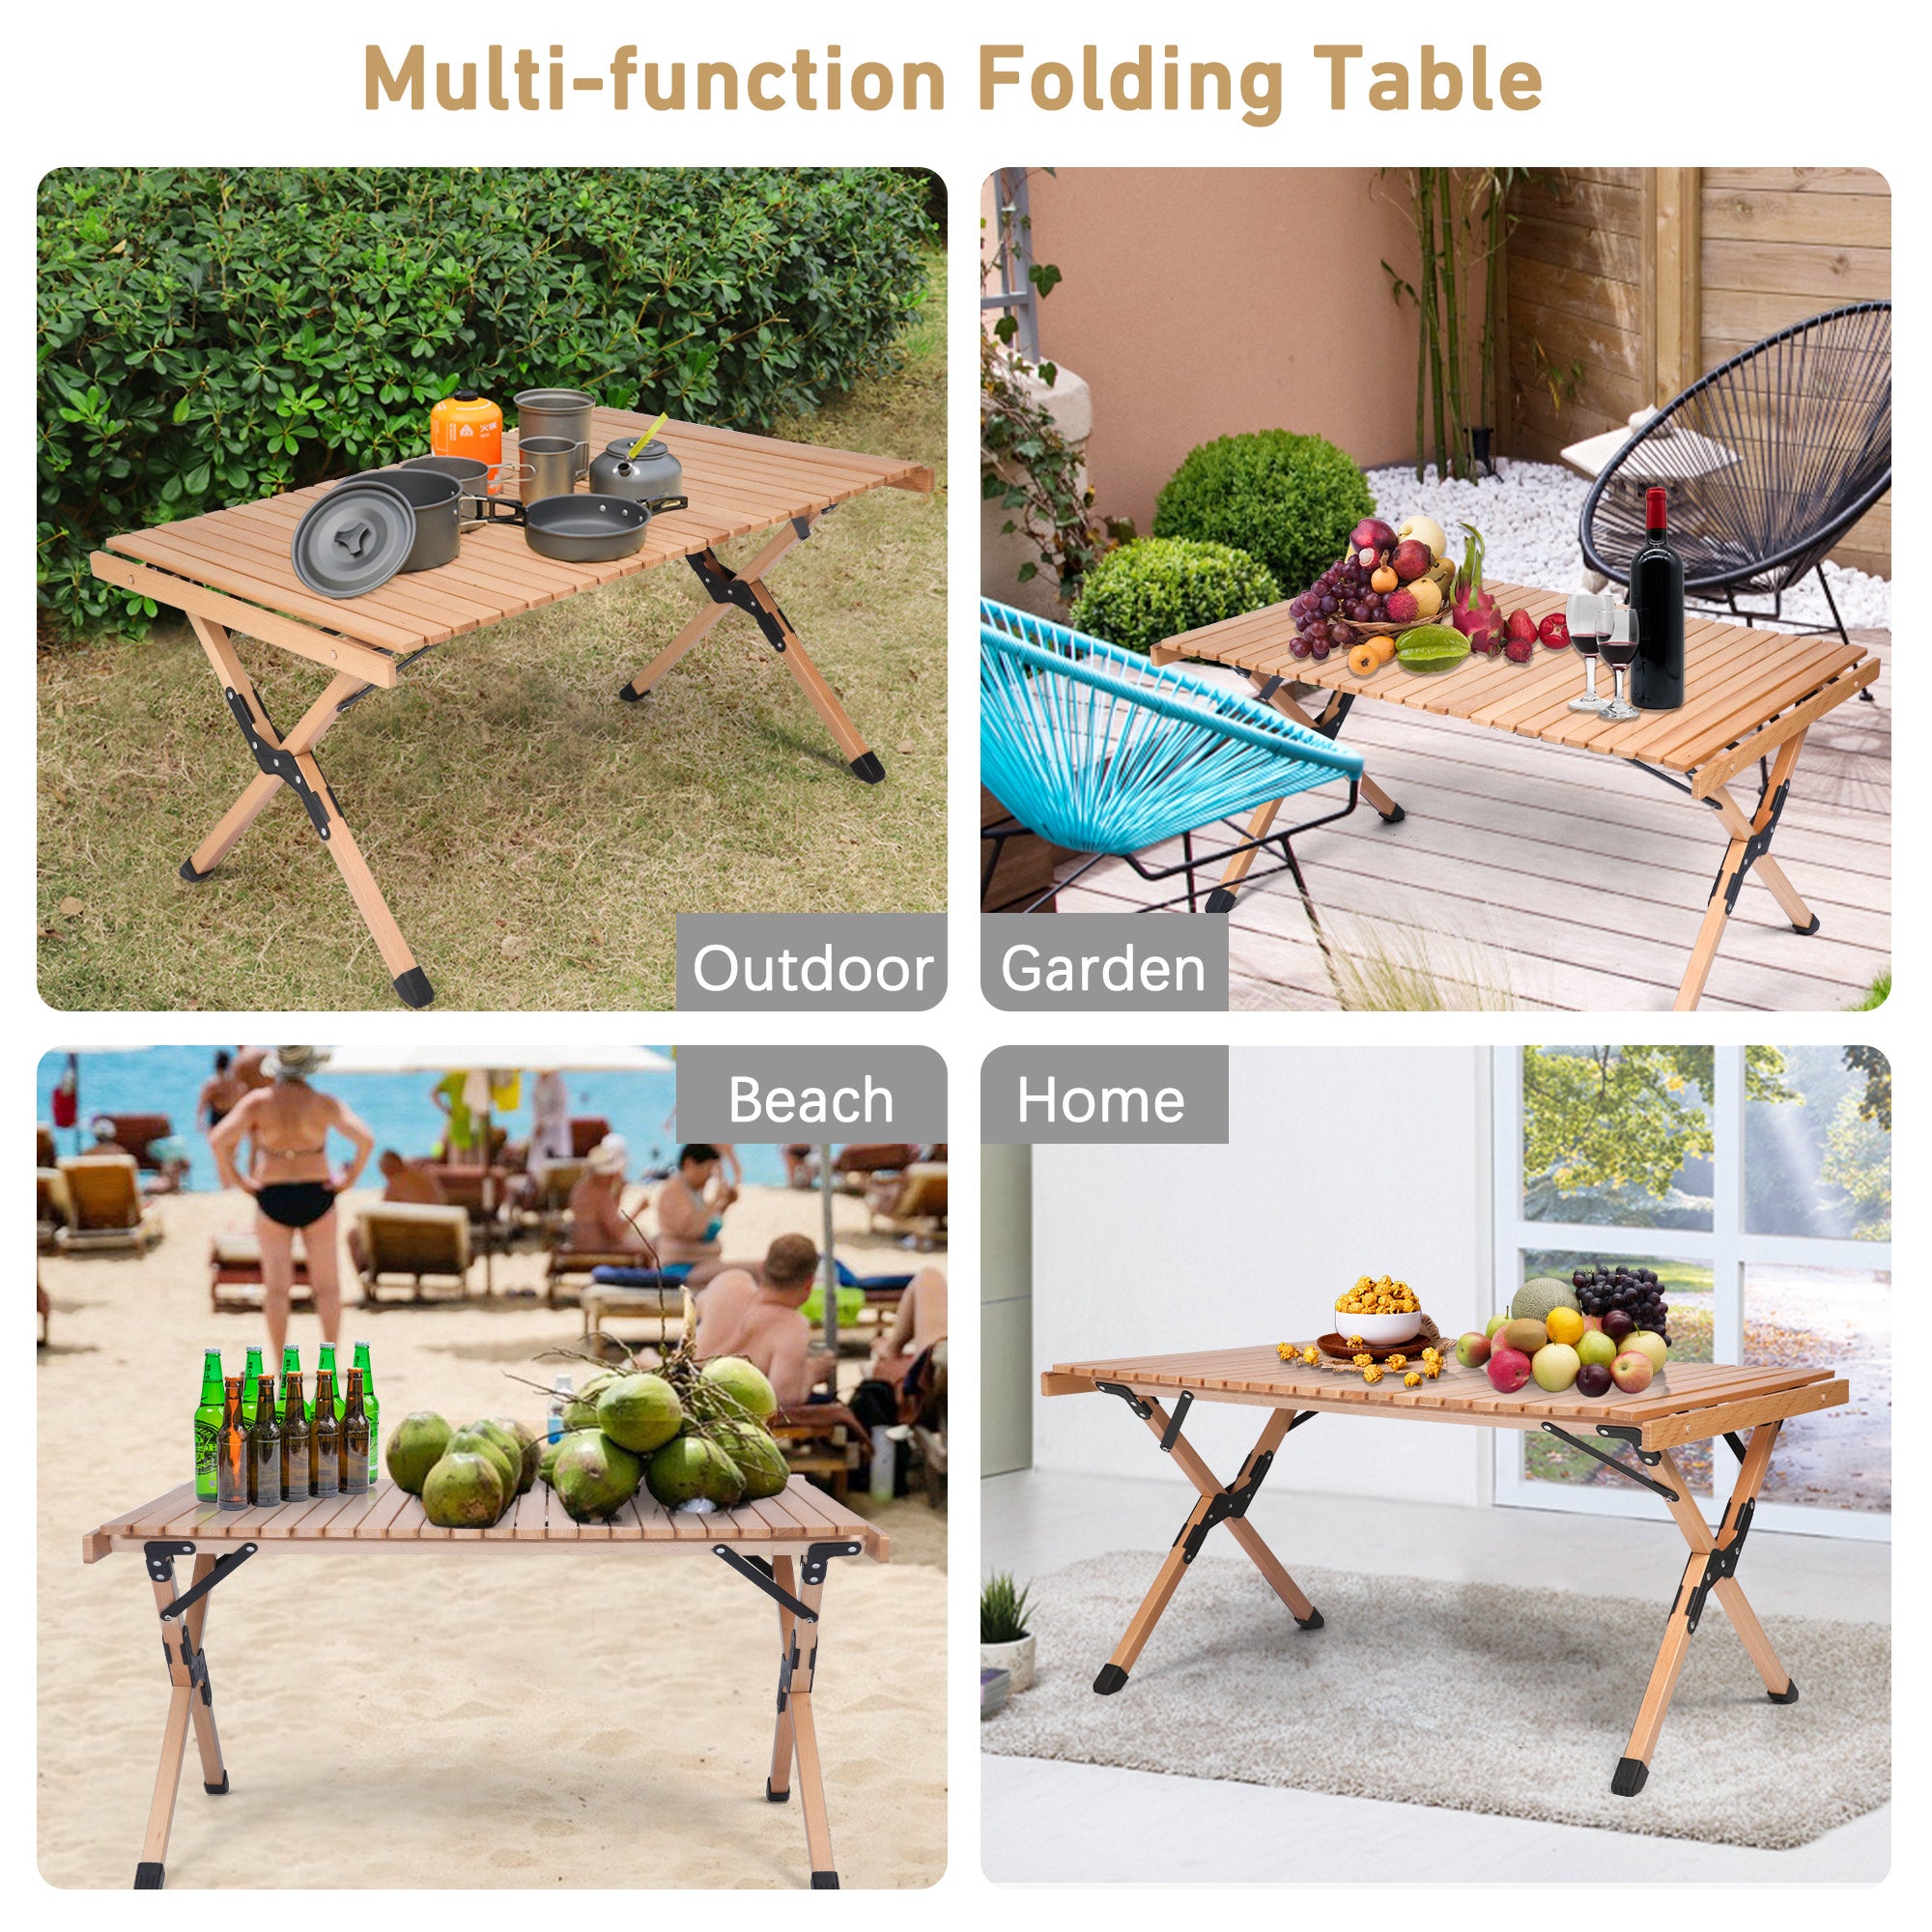 KARMAS PRODUCT Folding Outdoor Camping Wooden Table - Lightweight Roll Up Picnic Table with Carrying Bag， for Beach Backyard BBQ Party Fishing